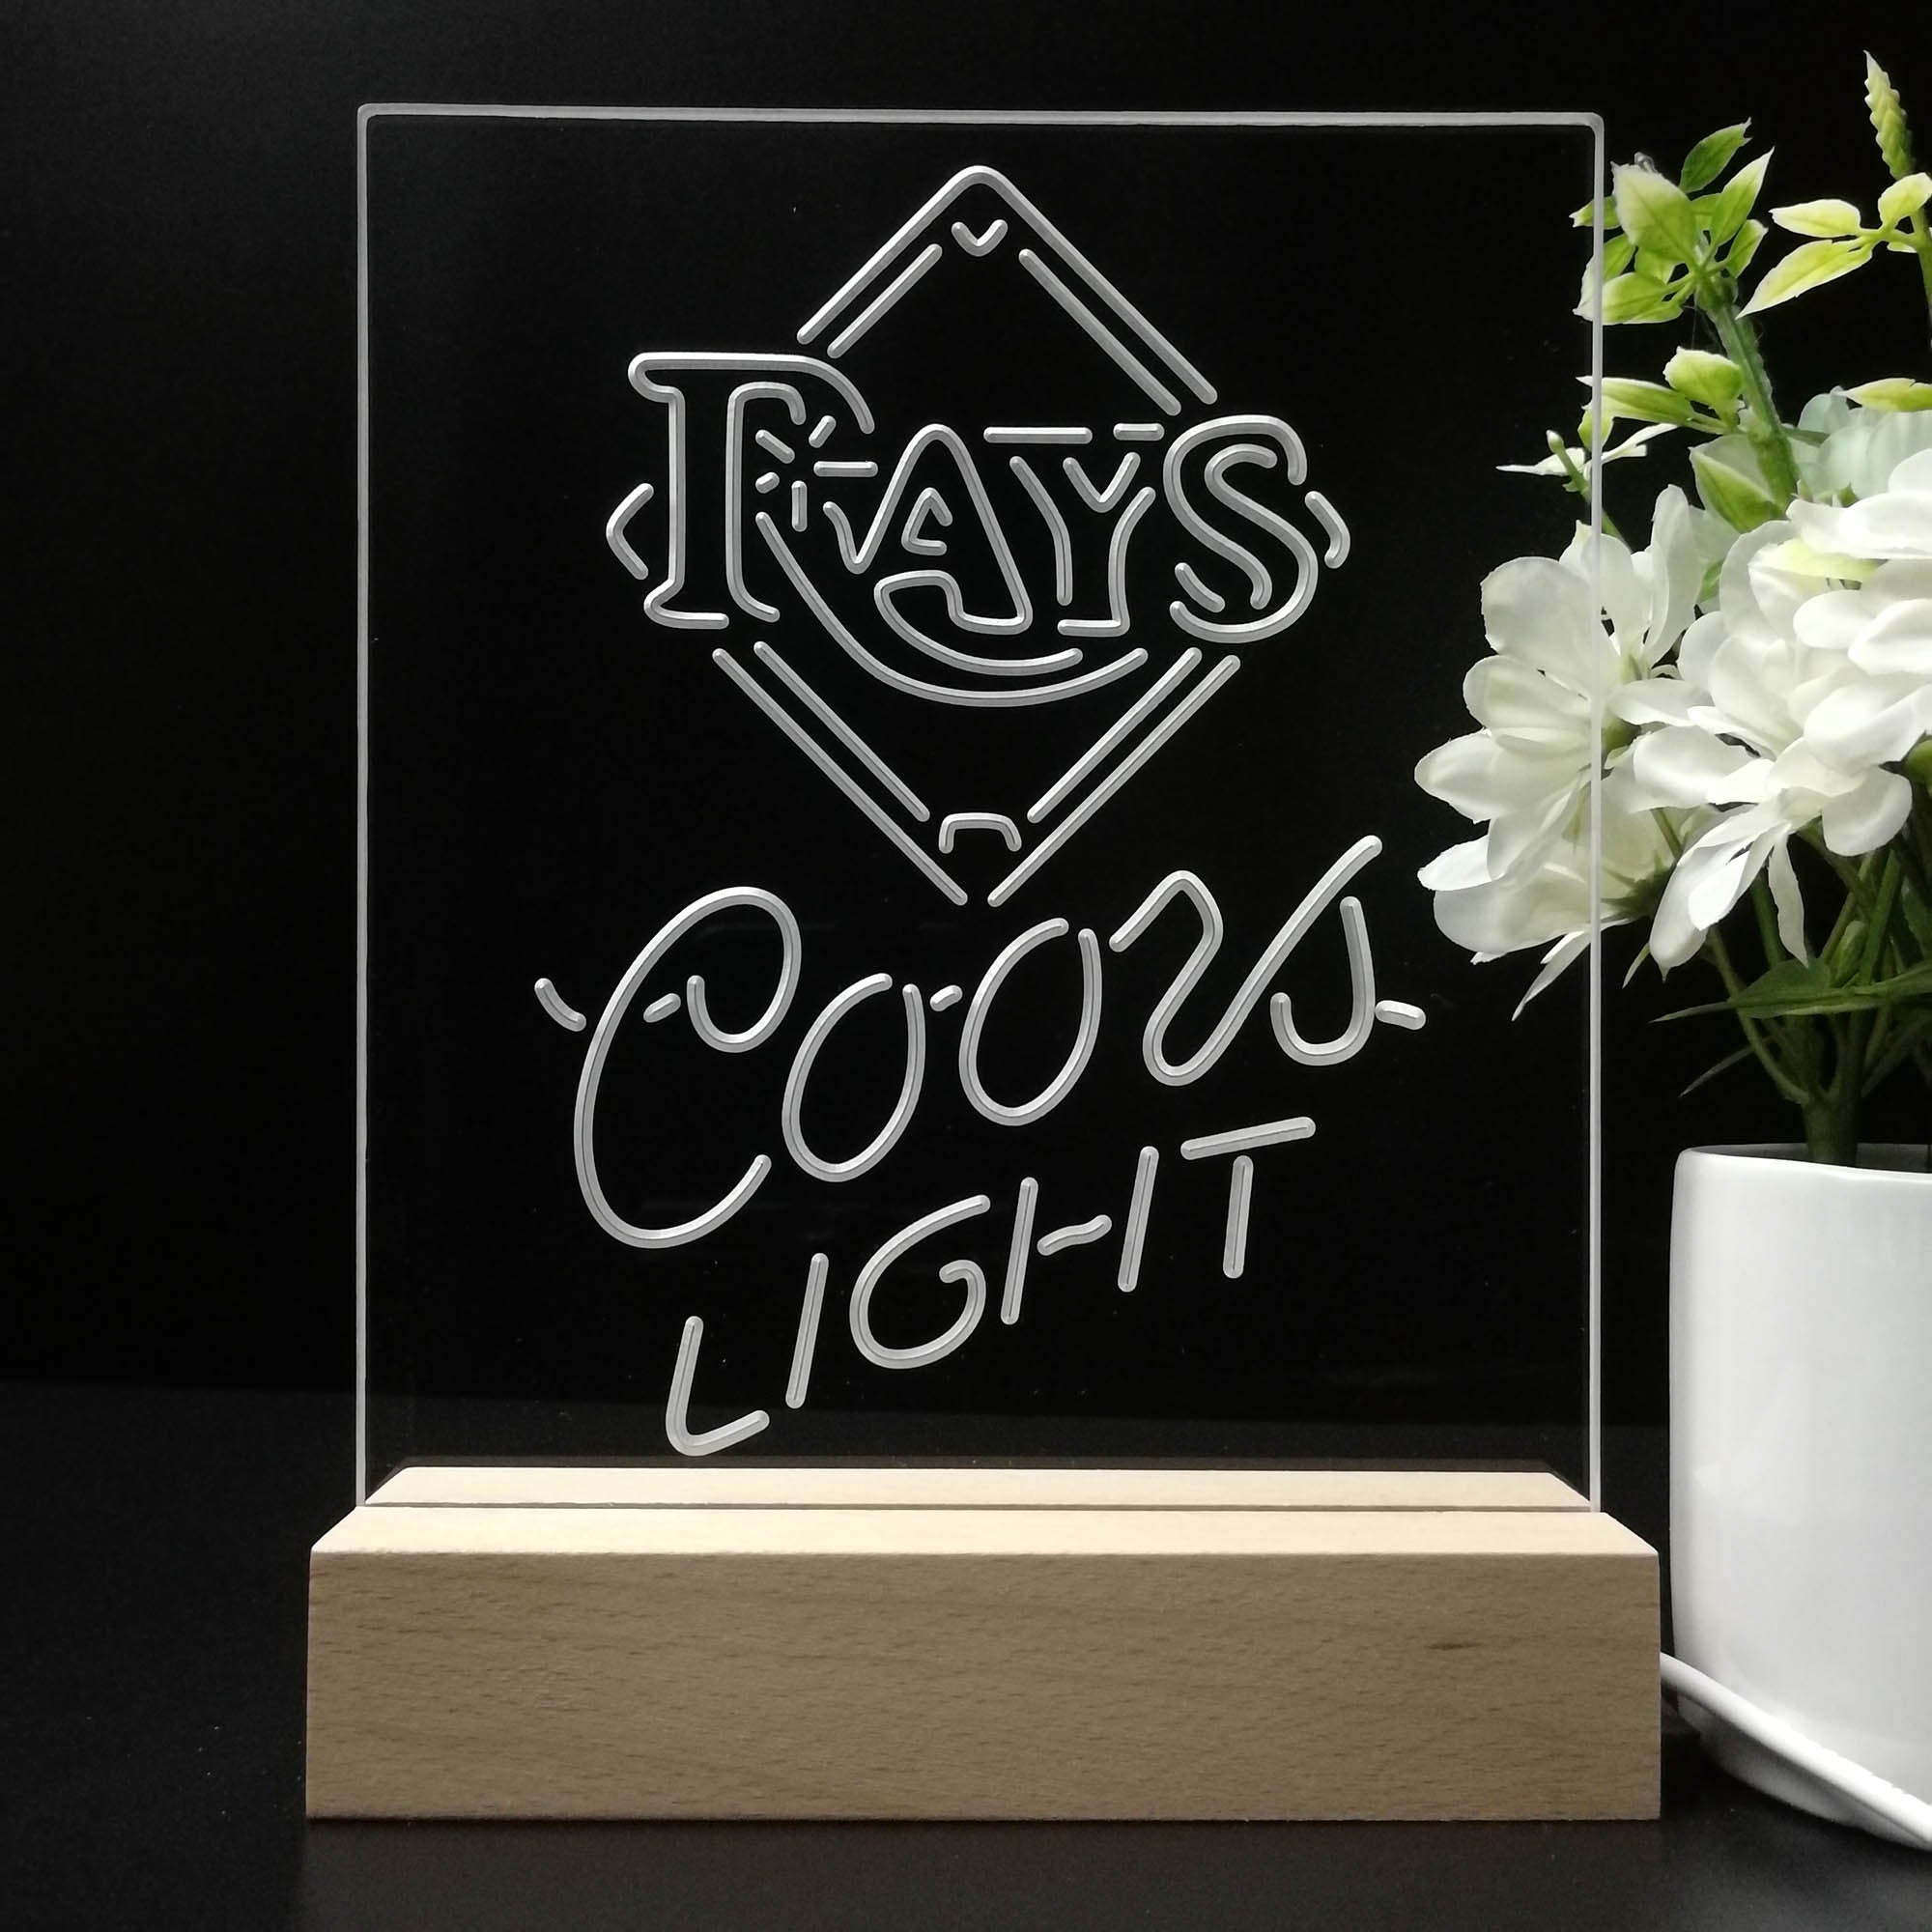 Tampa Bay Rays Coors Light Neon Sign Pub Bar Lamp